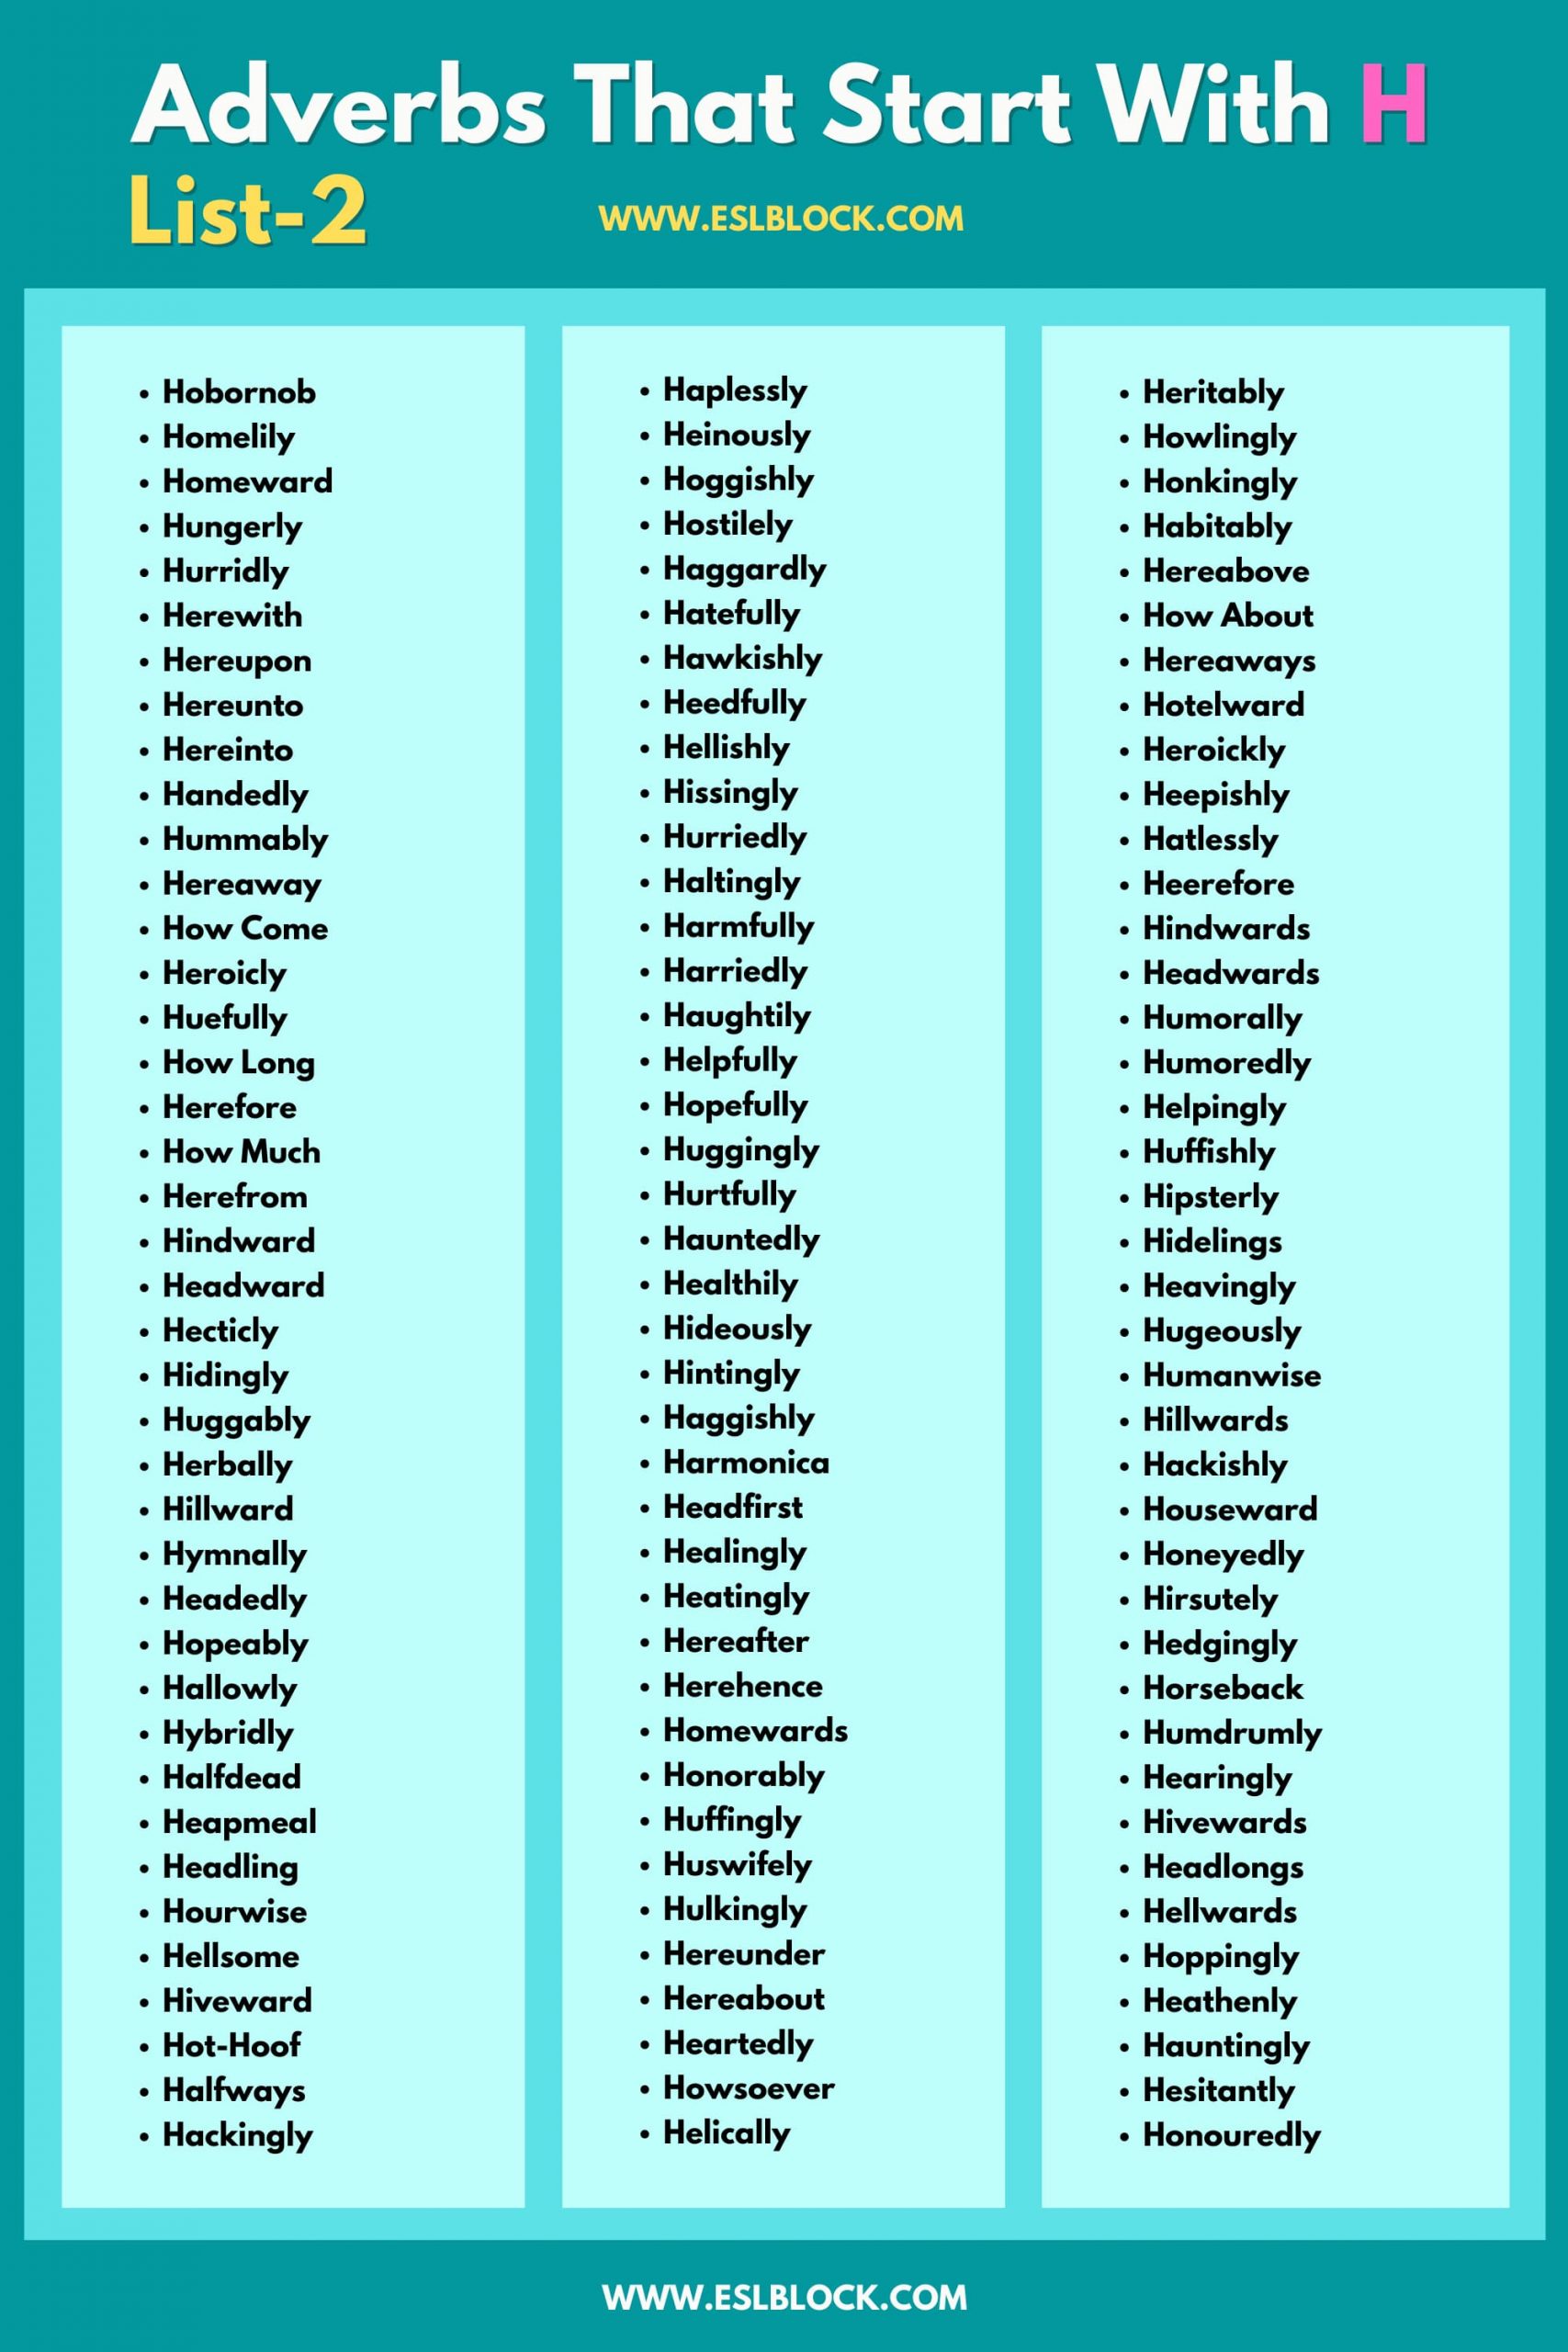 100 Example Sentences Using Adverbs, 4 Letter Adverbs That Start with H, 4 Letter Words, 5 Letter Adverbs That Start with H, 5 Letter Words, 6 Letter Adverbs That Start with H, 6 Letter Words, A to Z Adverbs, AA Adverbs, Adverb vocabulary words, Adverbs, Adverbs That Start with H, Adverbs with Example Sentences, All Adverbs, Types of Adverbs, Types of Adverbs with Example Sentences, Vocabulary, What are Adverbs, What are the types of Adverbs, Words That with H